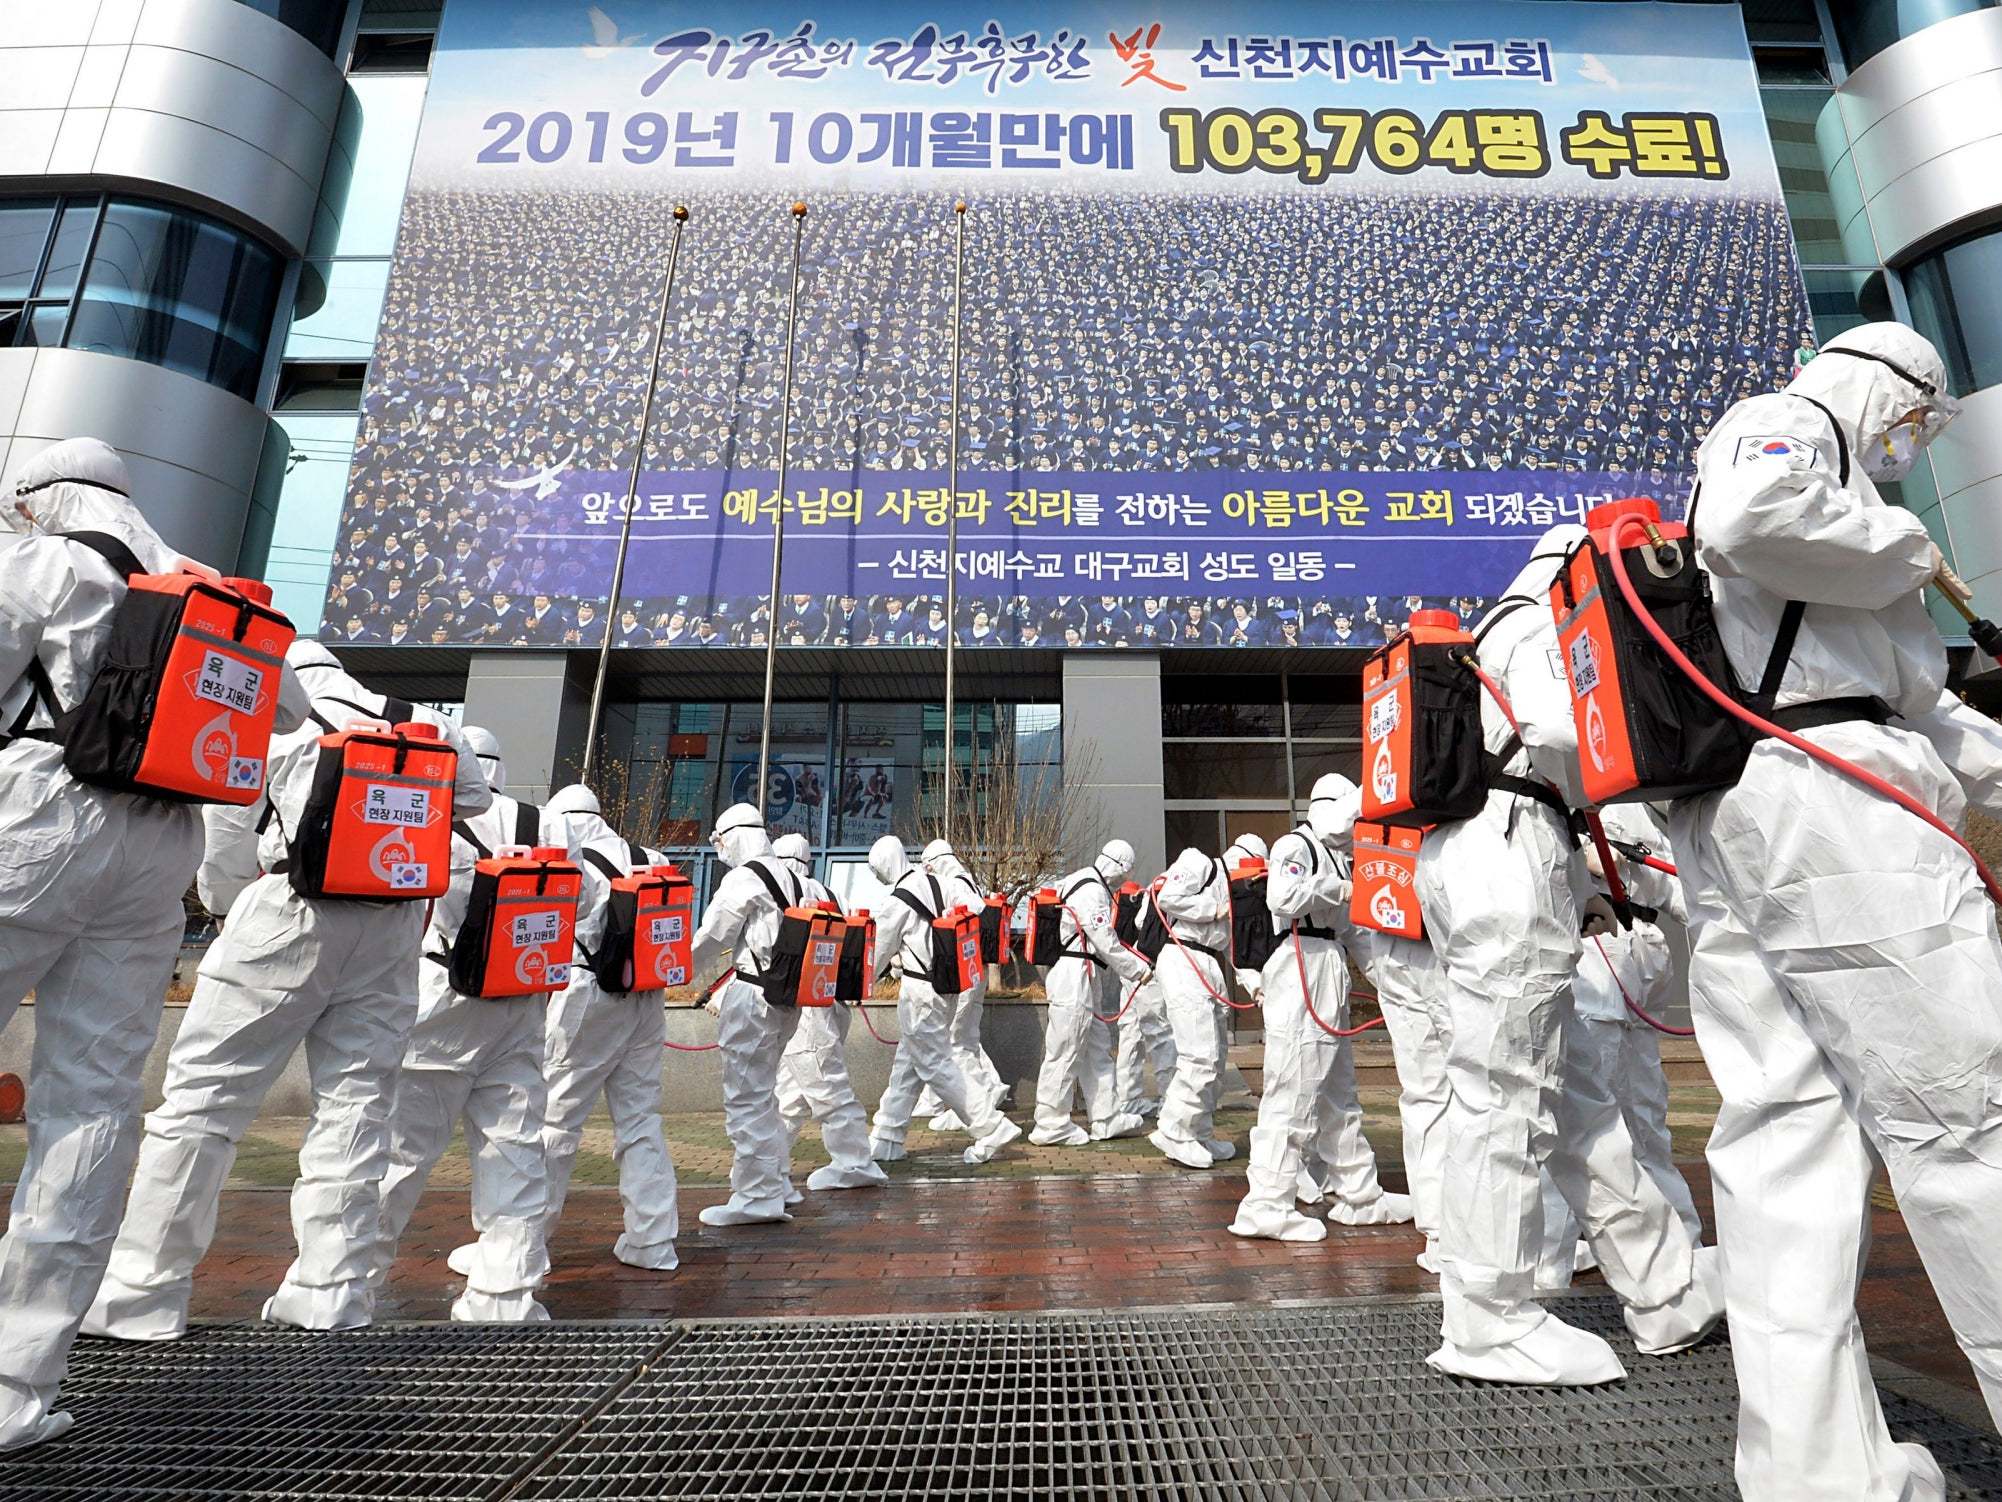 Army personnel spray disinfectant to prevent the spread of the coronavirus in front of a branch of the Shincheonji Church of Jesus in Daegu, South Korea